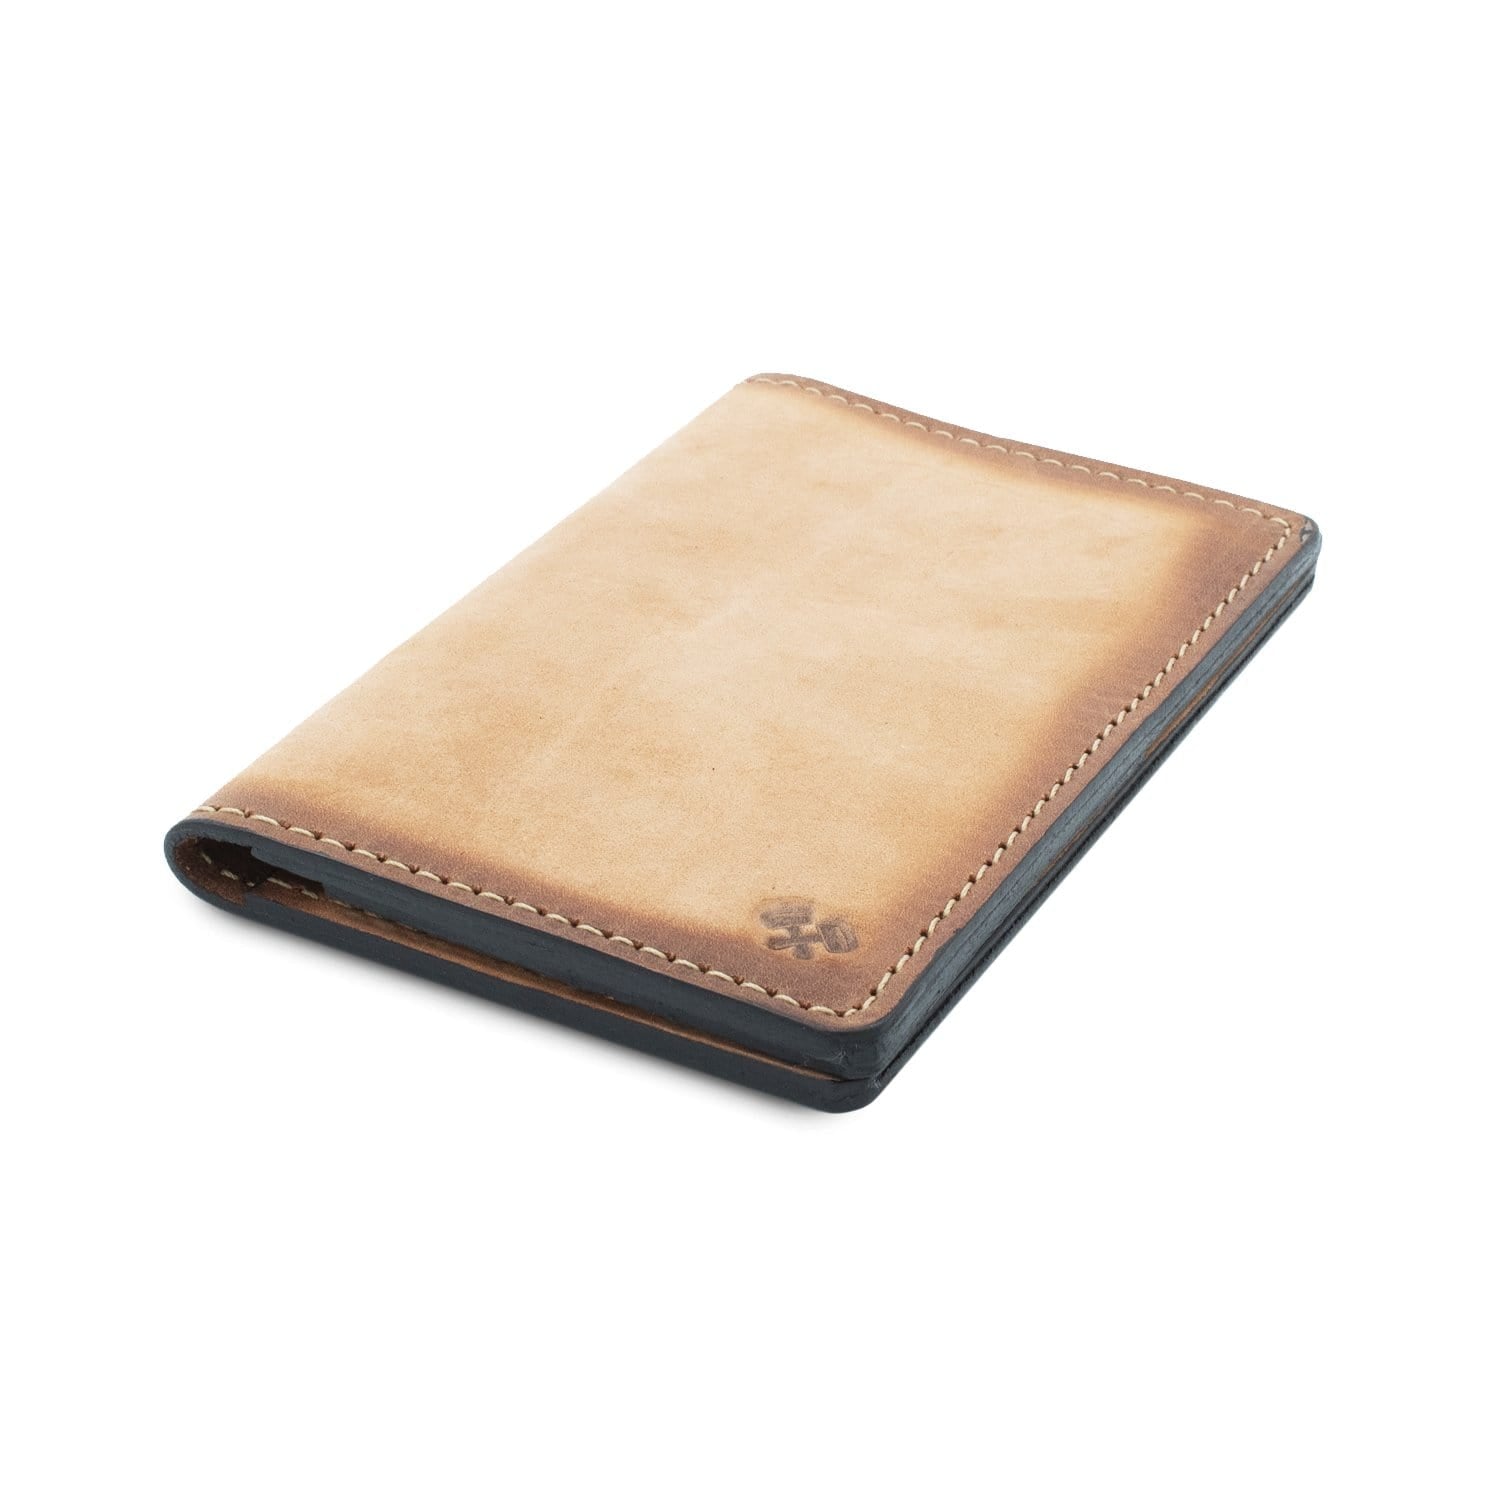 Main Street Forge Small Goods Charred Oak Leather Passport Holder | Full Grain Leather Cover | Perfect for Travel | Made in USA